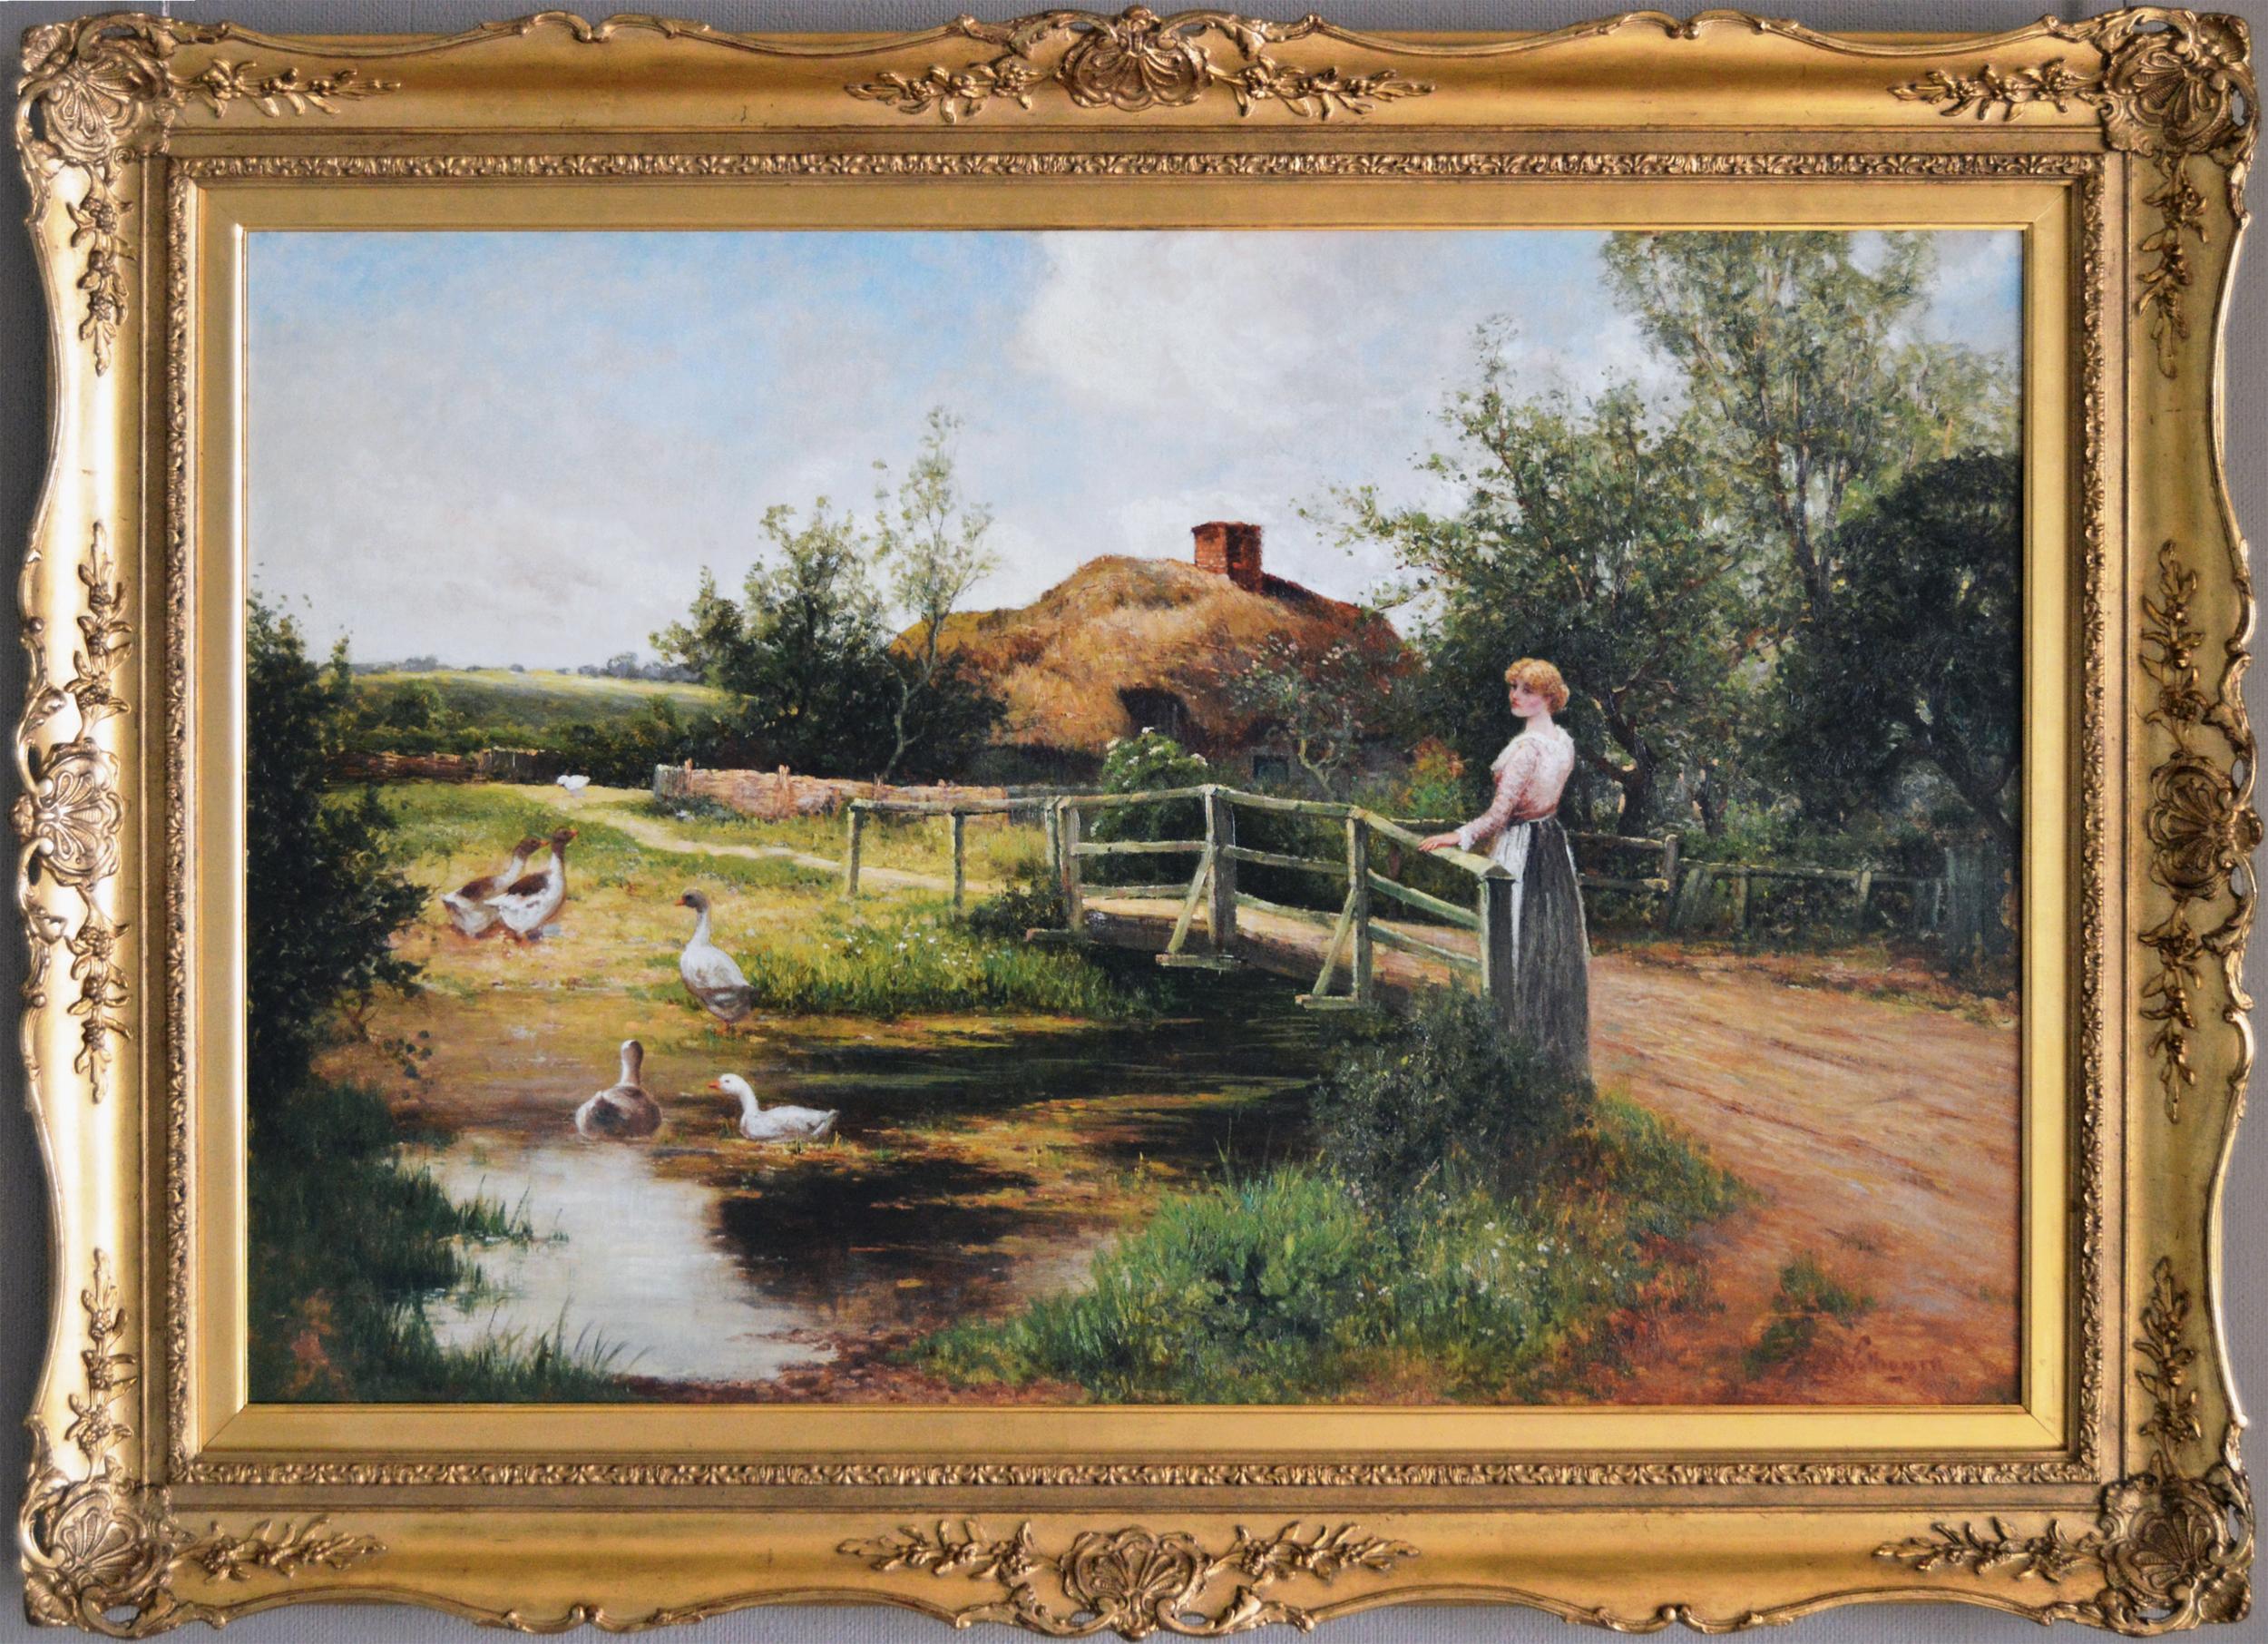 Ernest Walbourn Figurative Painting - 19th Century genre oil painting of a women by a pond